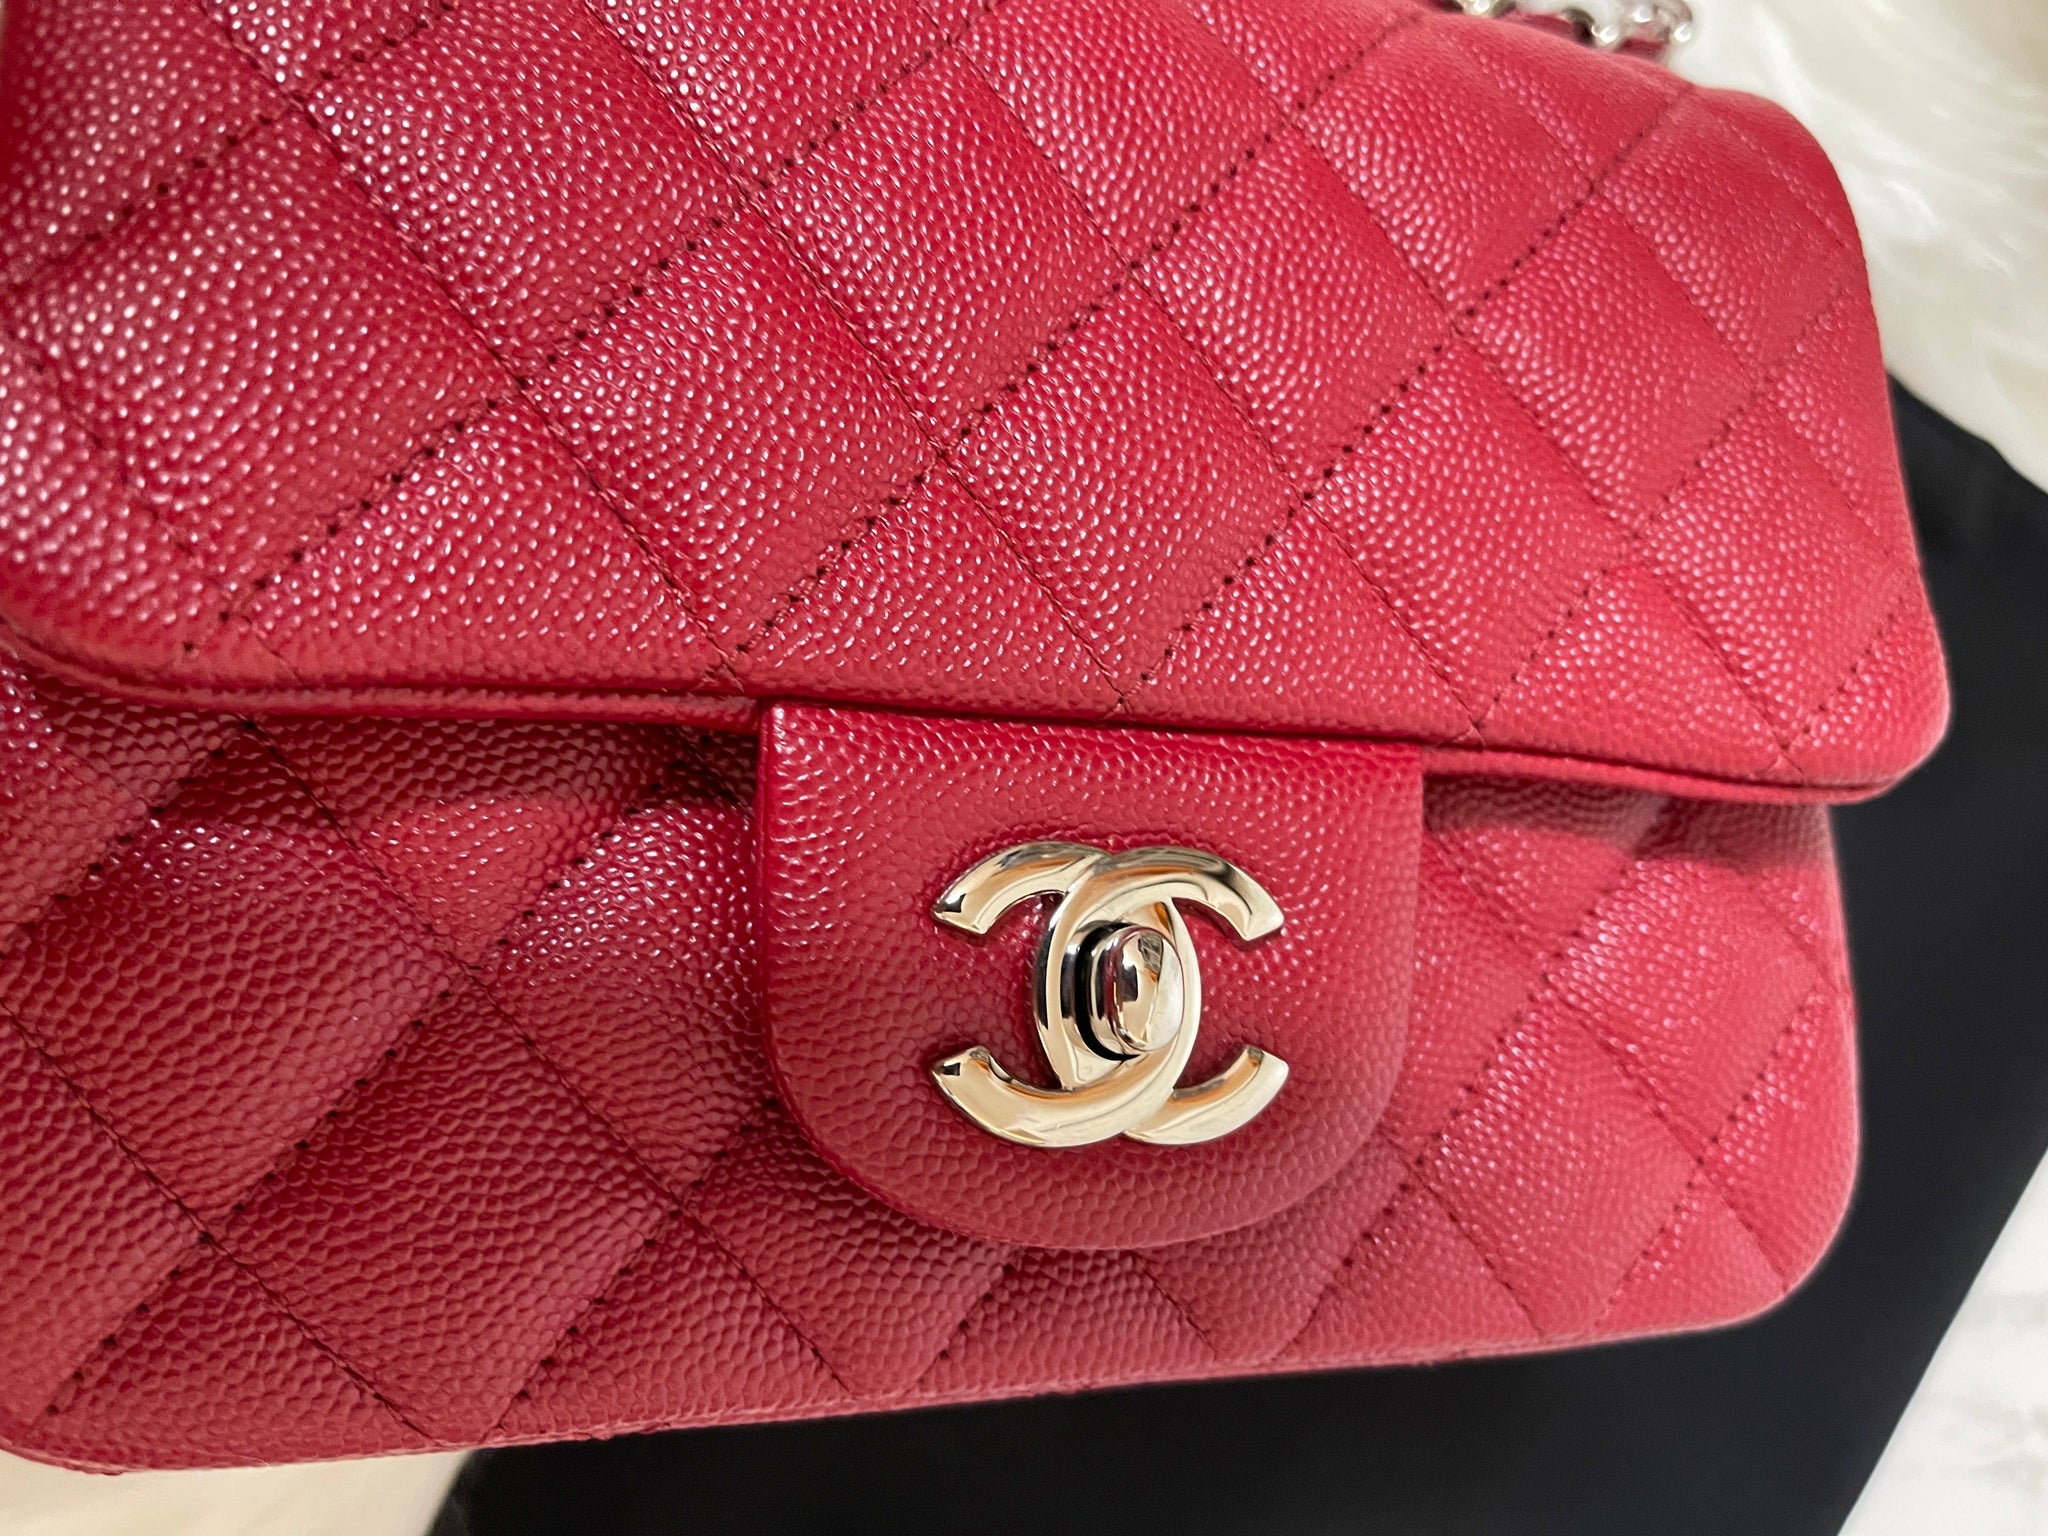 Chanel Red Chevron Quilted Patent Leather Classic Rectangular Mini Flap Bag